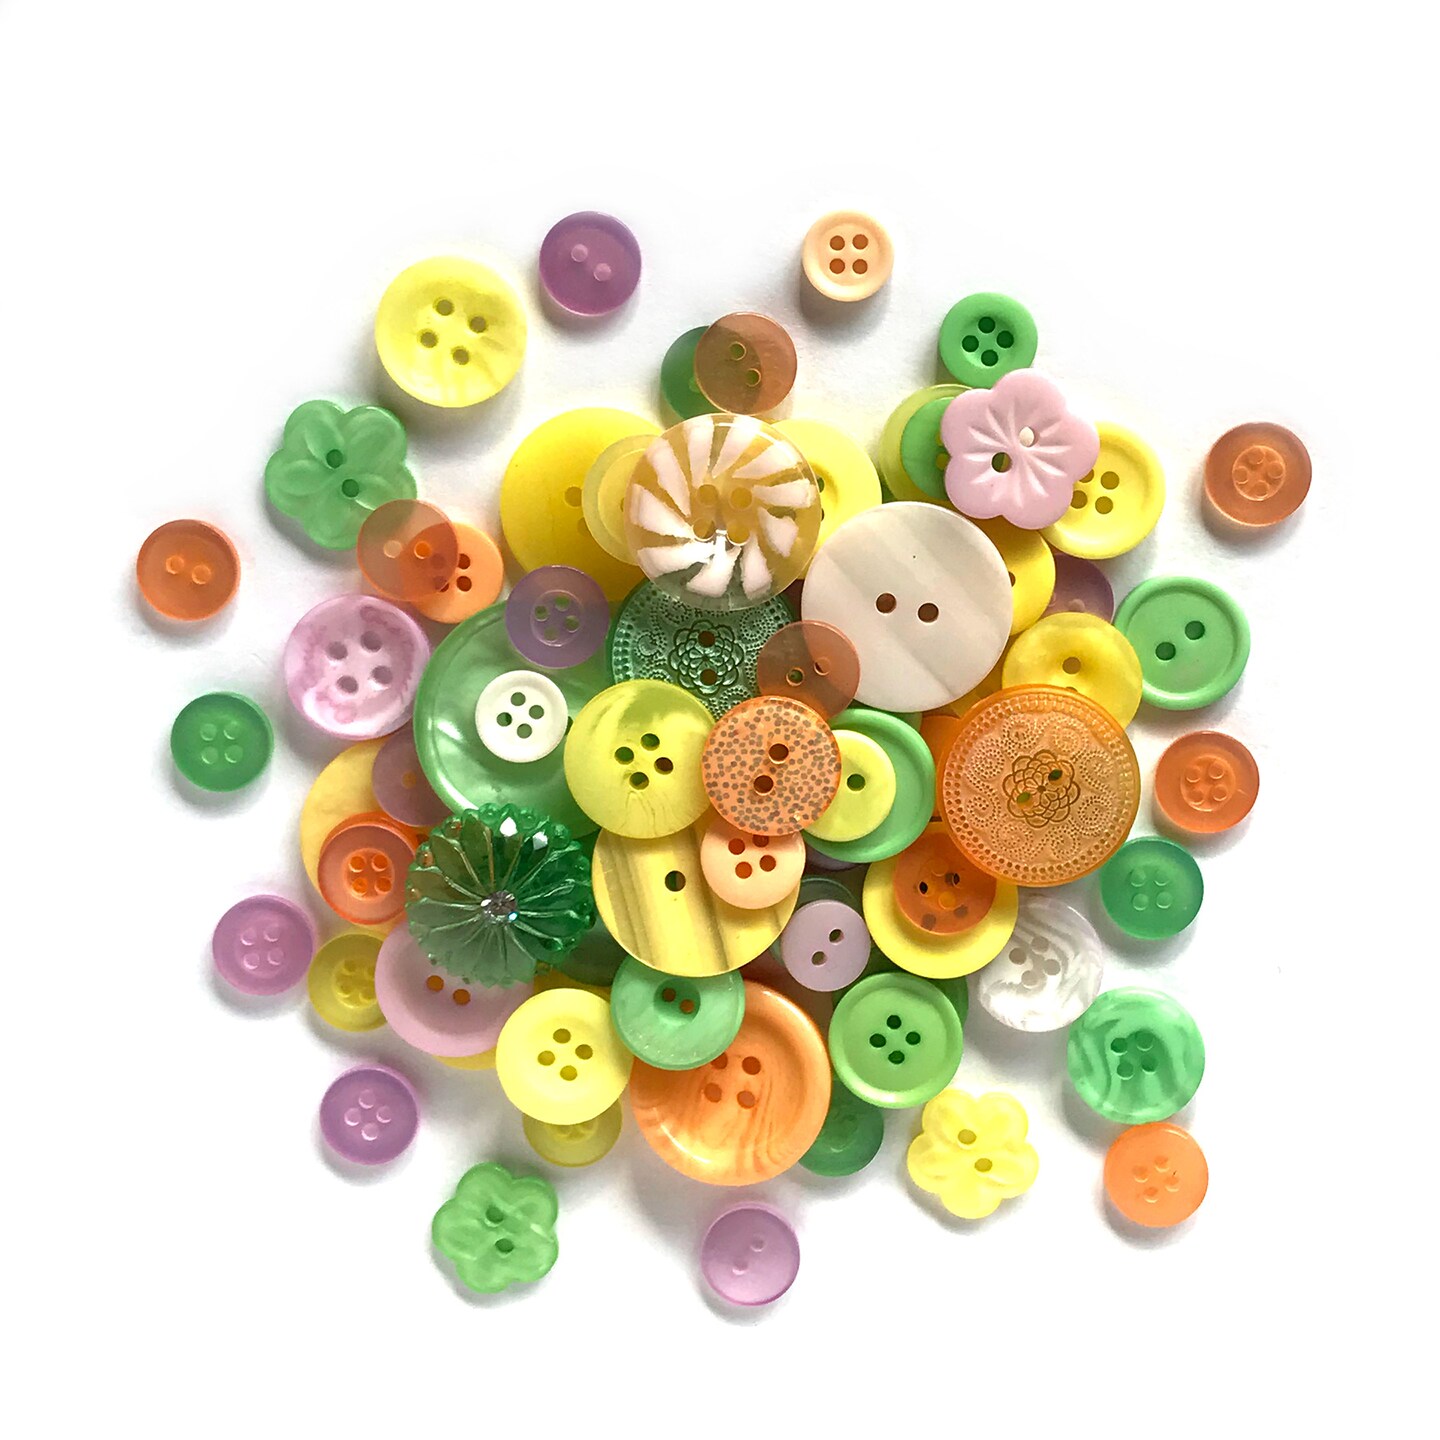 Scrambled Assortment Bag of Buttons for Arts & Crafts, Decoration,  Collections, Sewing, and More! (100 Pack)